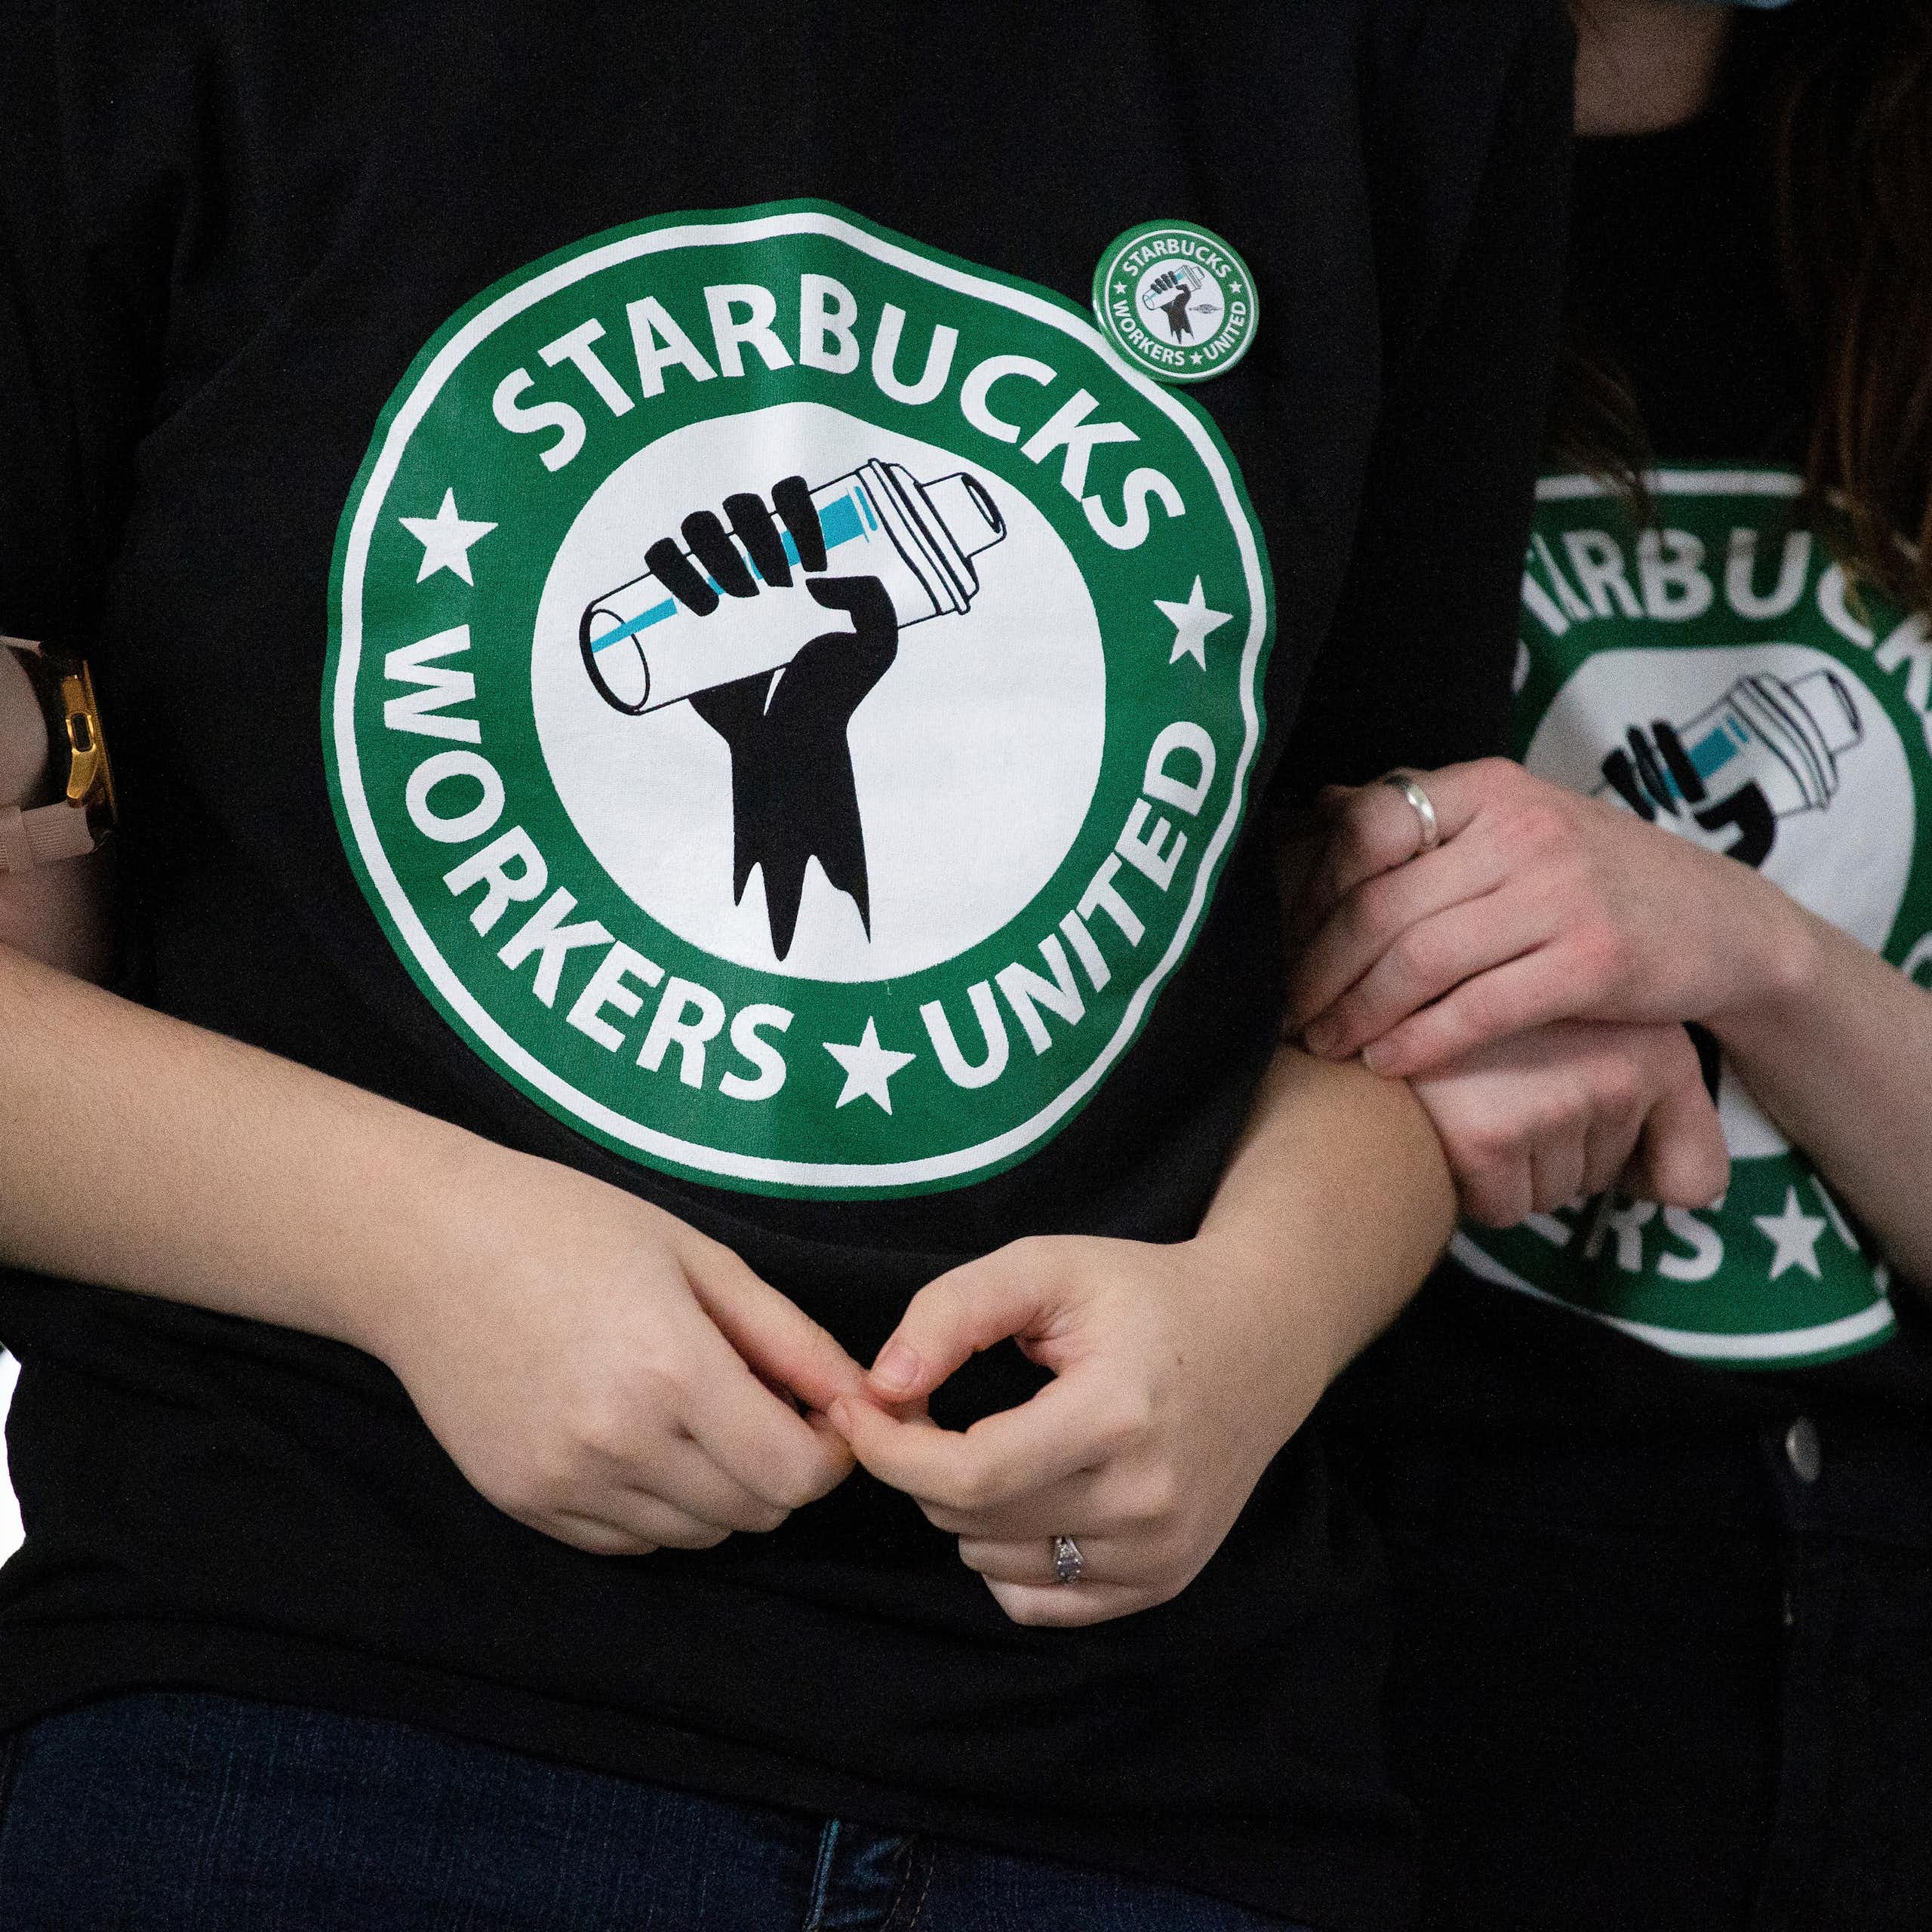 Starbucks employees and supporters link arms, with two wearing Starbucks Workers United t-shirts.